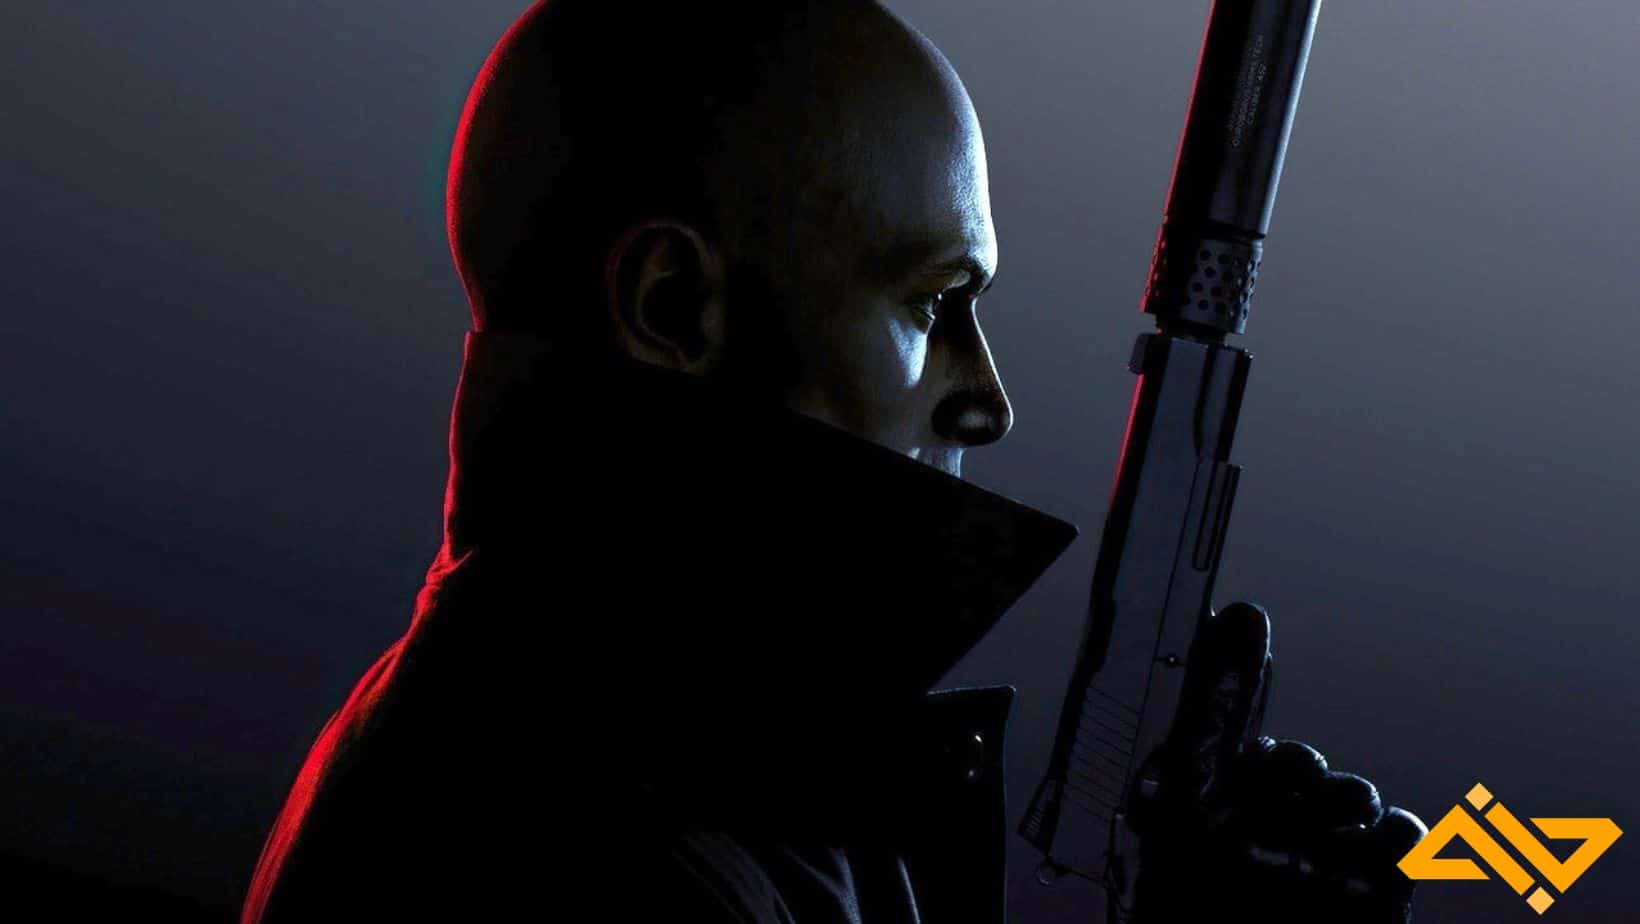 Hitman has been around for a long while, Hitman 3 is the third and final entry in the latest rebooted trilogy.